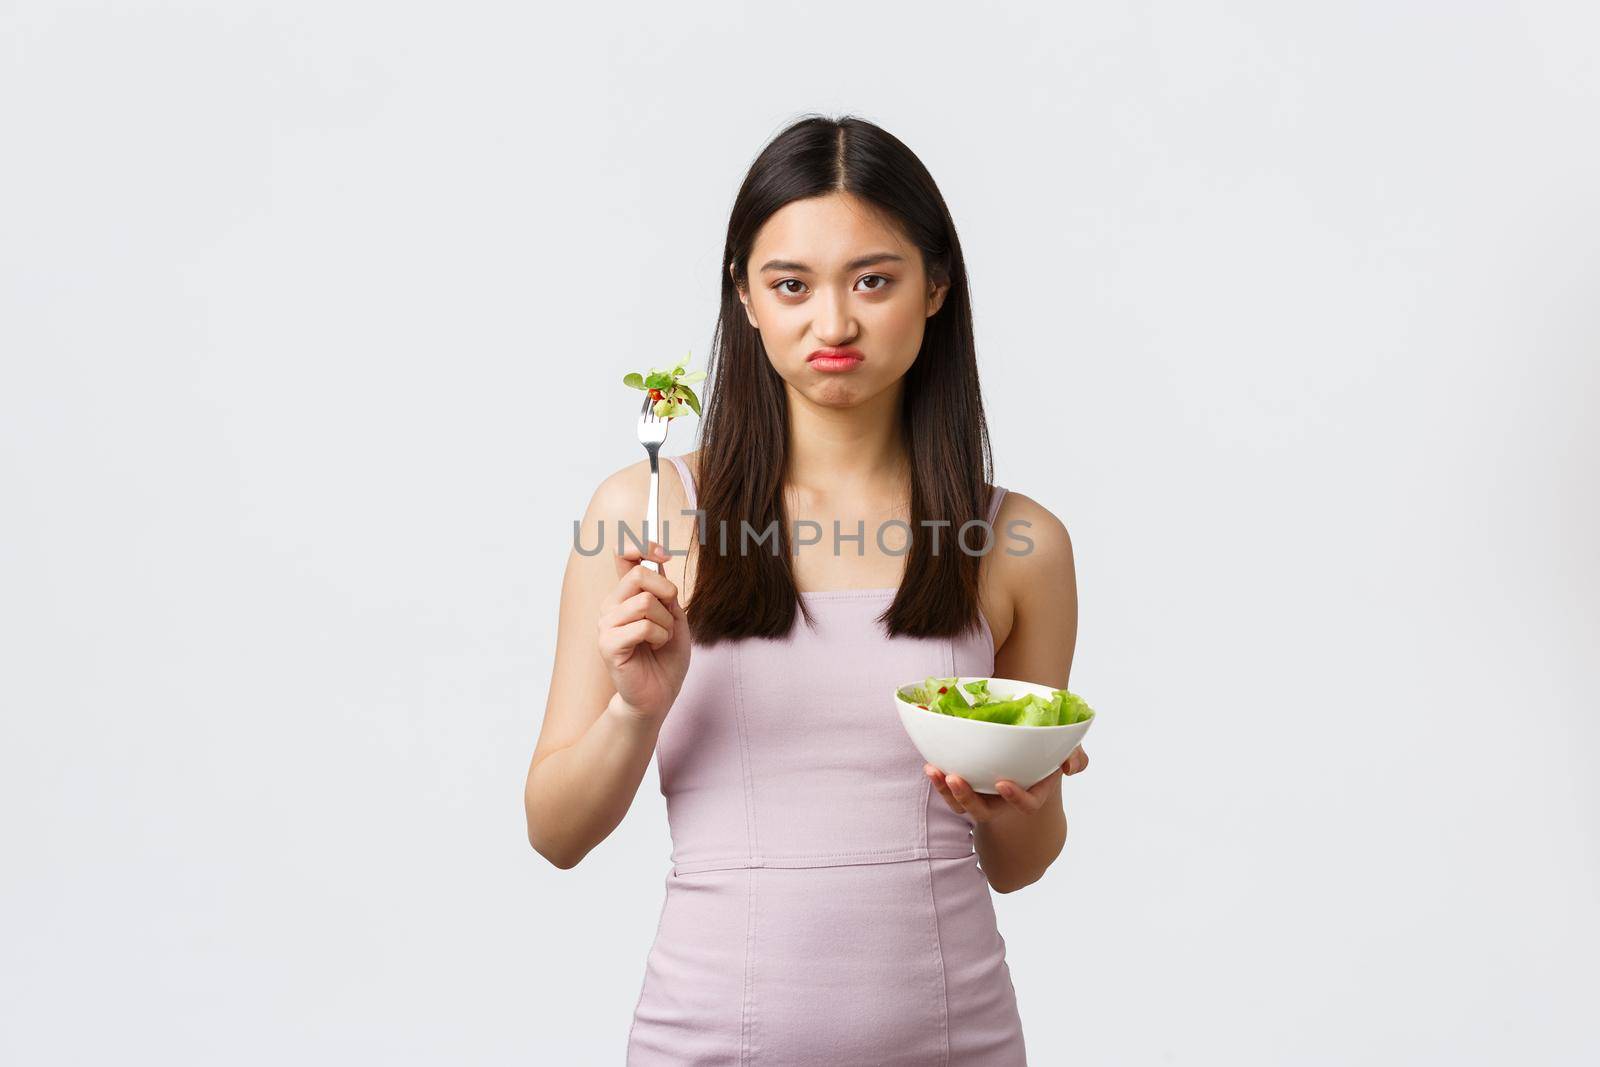 Healthy lifestyle, leisure and people emotions concept. Gloomy pouting asian girl dislike eating vegetables, holding bowl with salad, grimacing as unwilling sit on diet, white background.